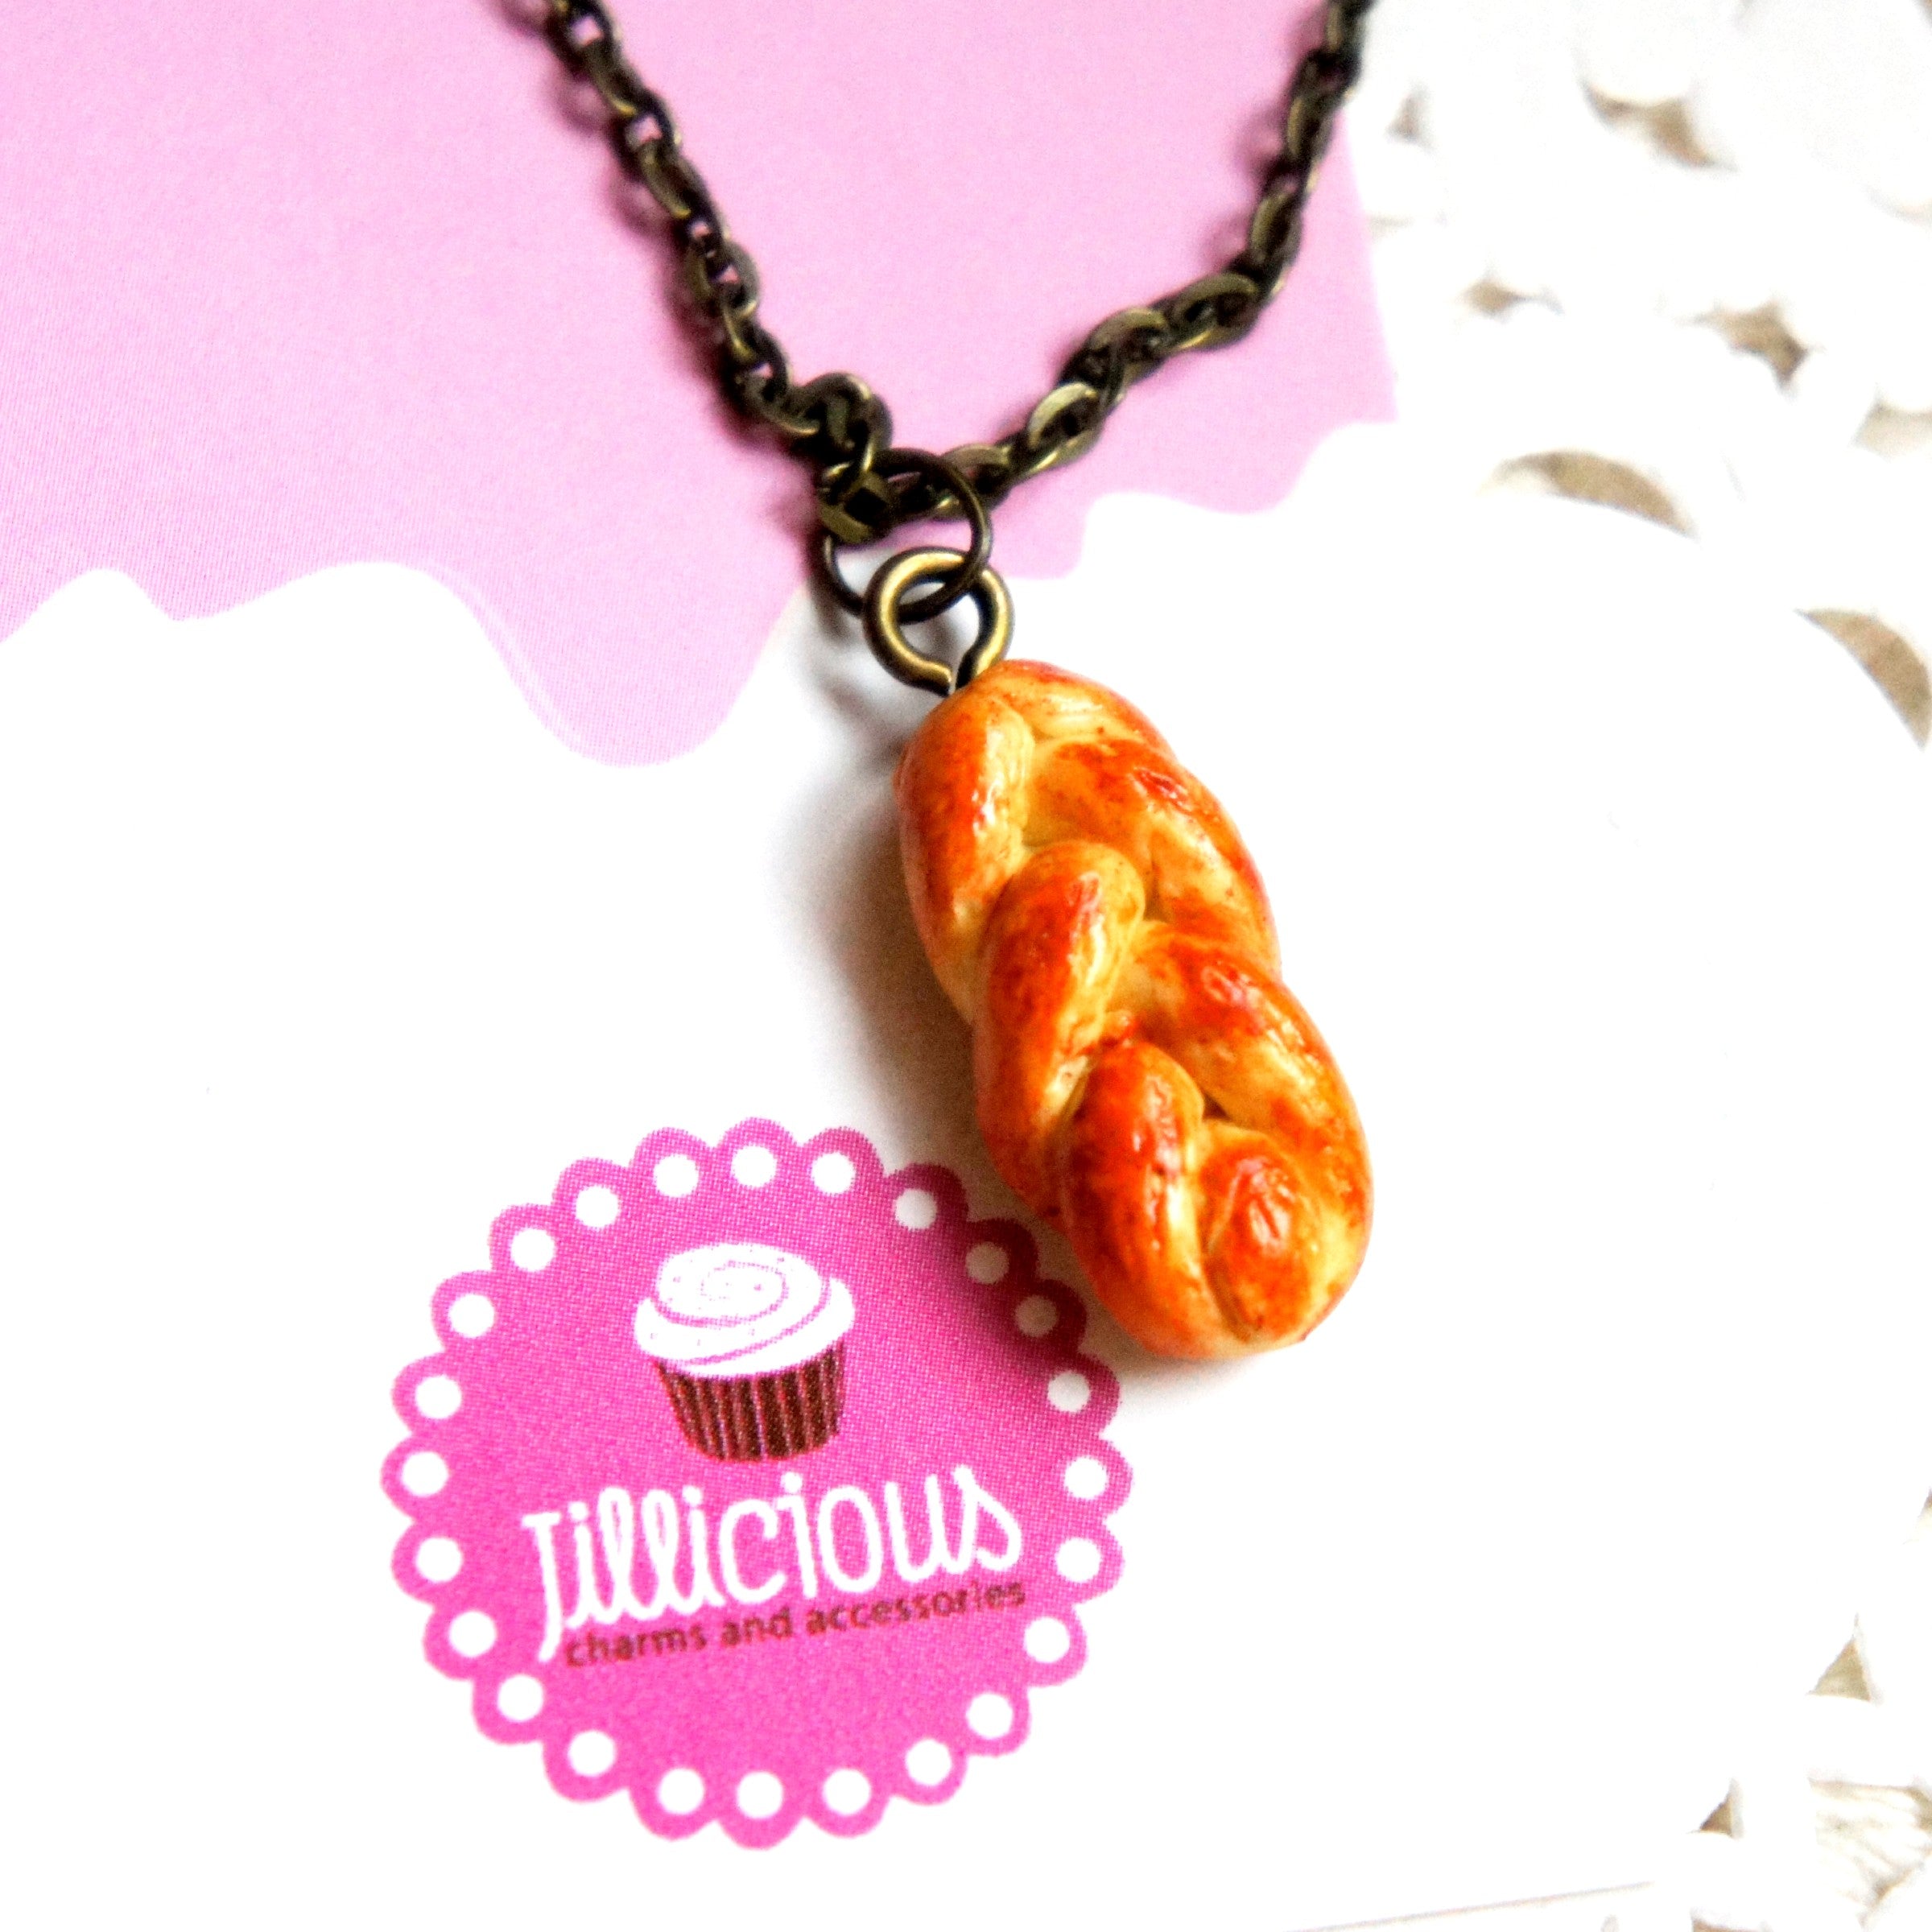 Challah Bread Necklace